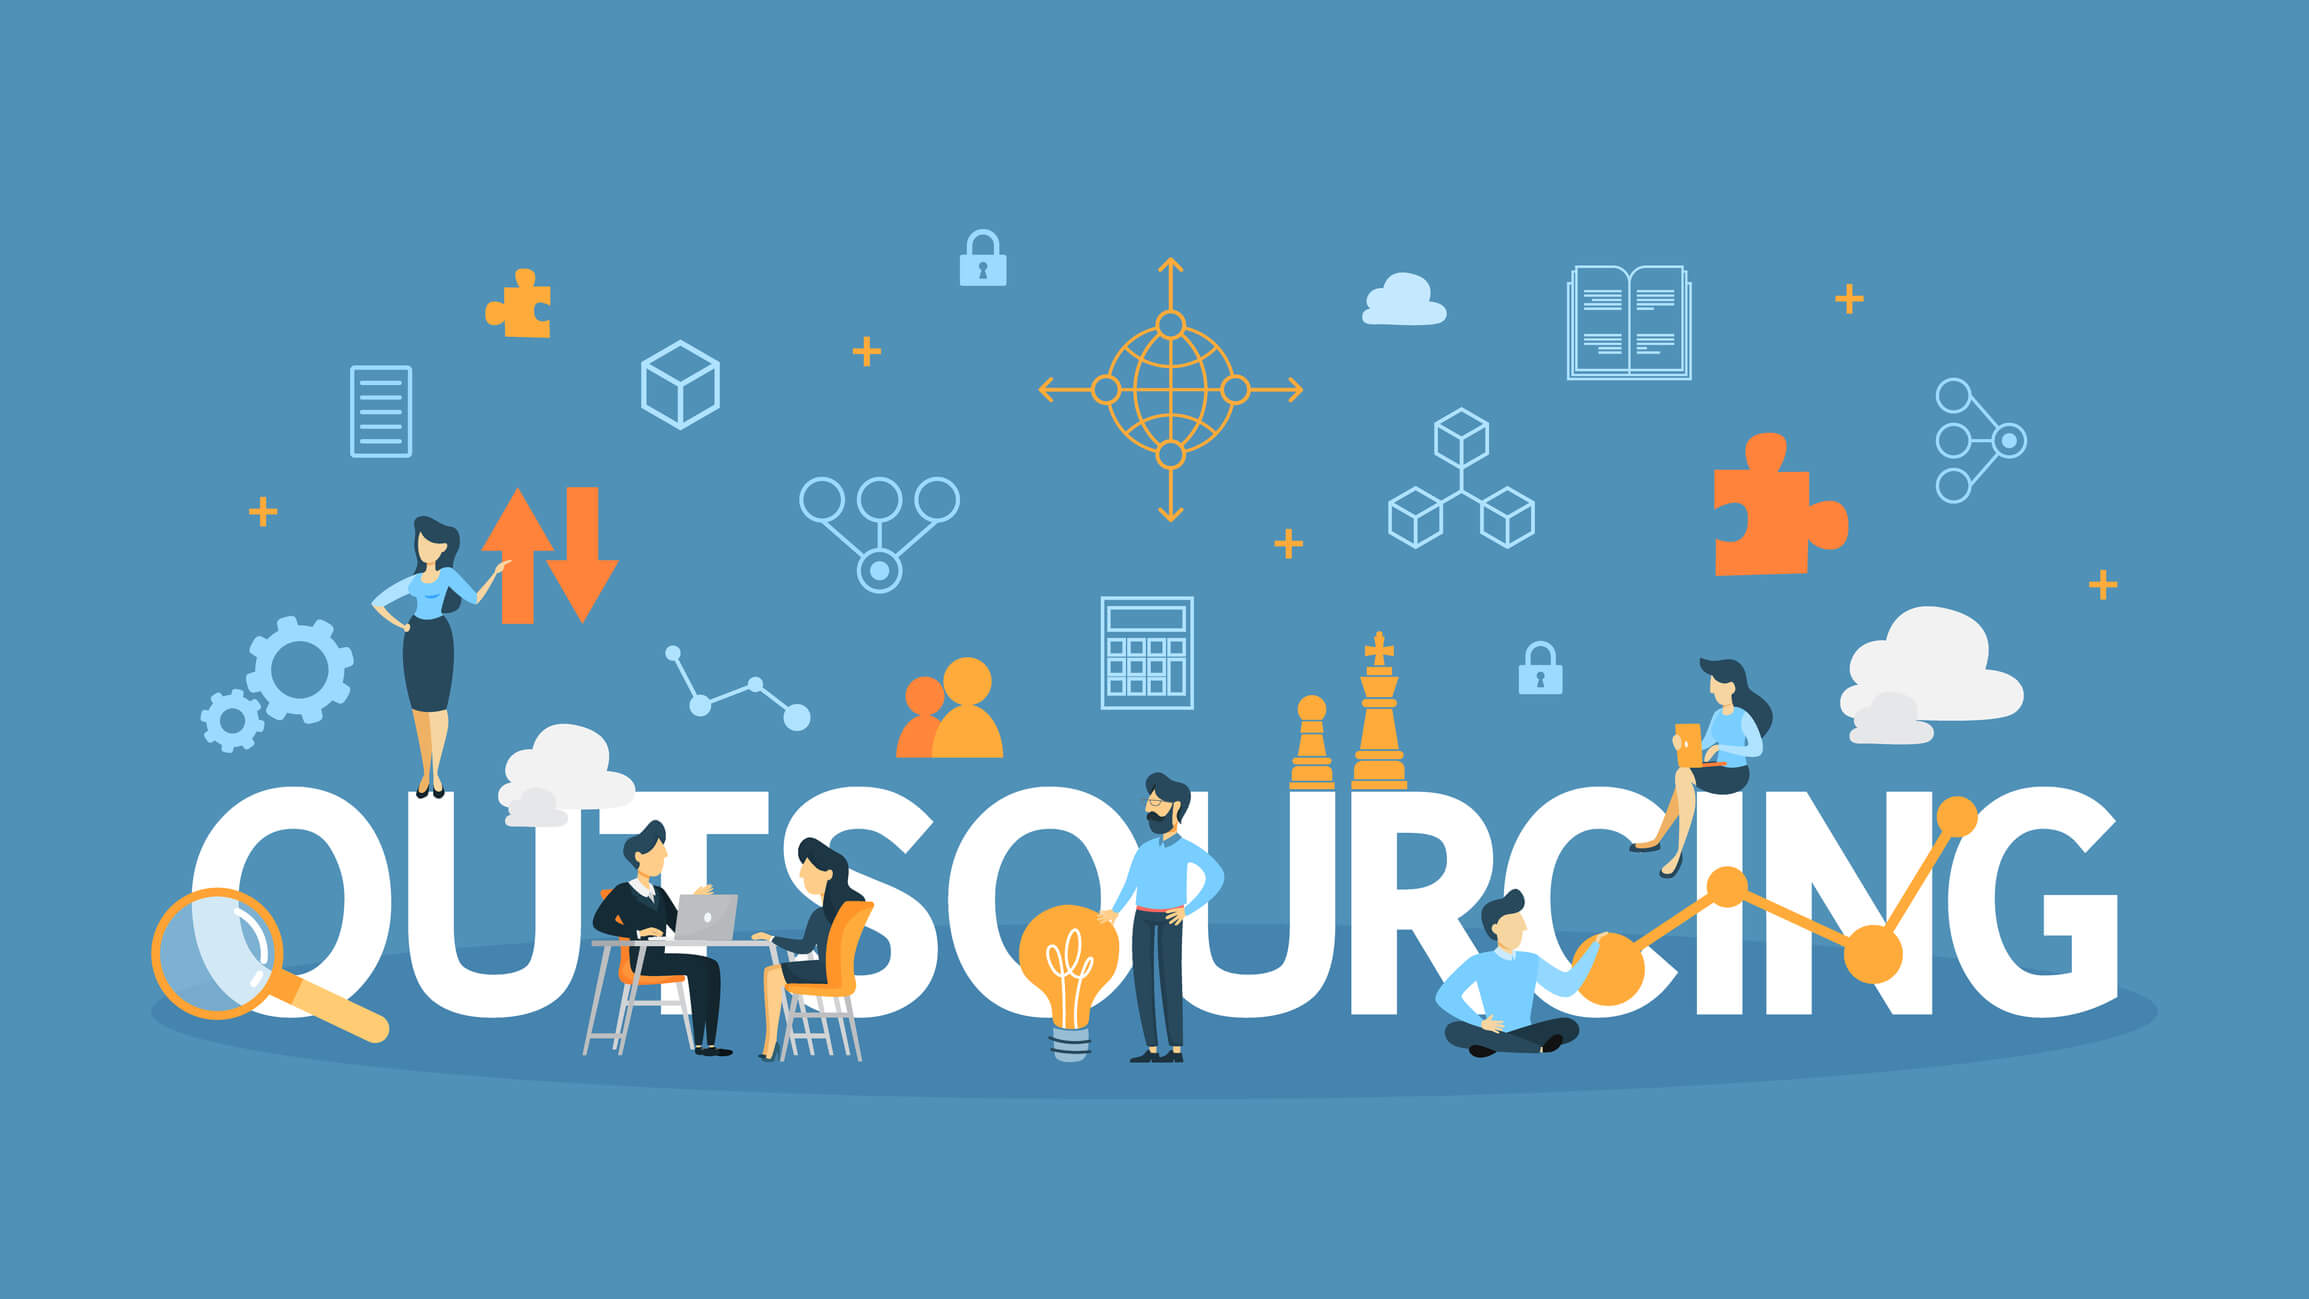 10 reasons why outsourcing software development works!